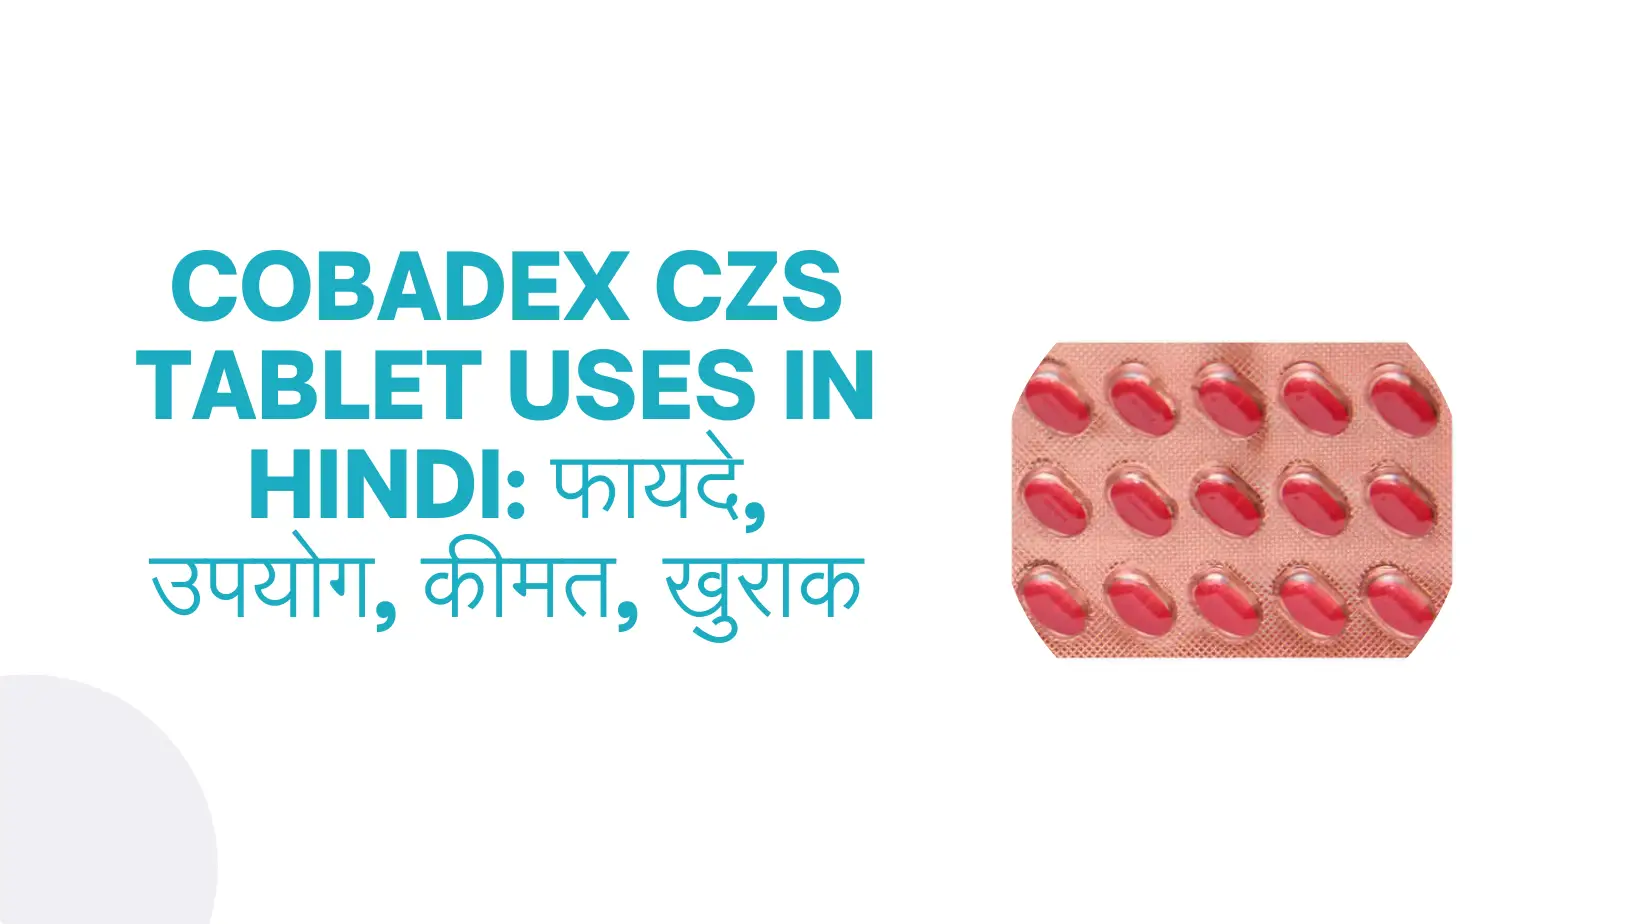 Cobadex Czs Tablet Uses In Hindi